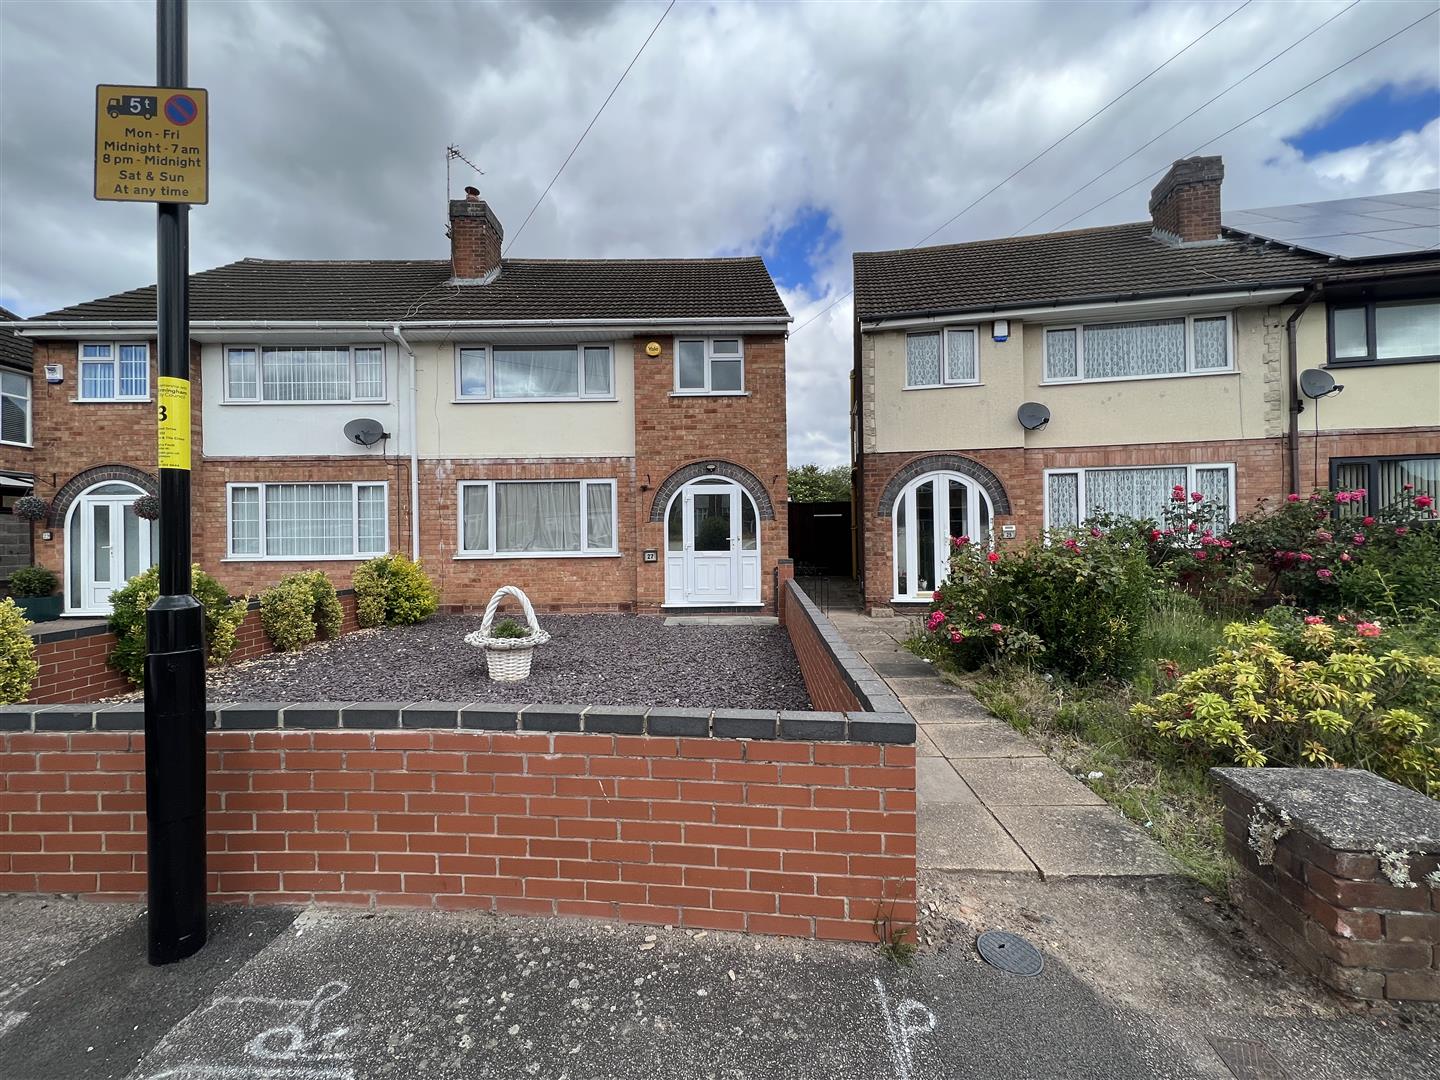 3 bed house for sale in Rockland Drive, Stechford, Birmingham - Property Image 1